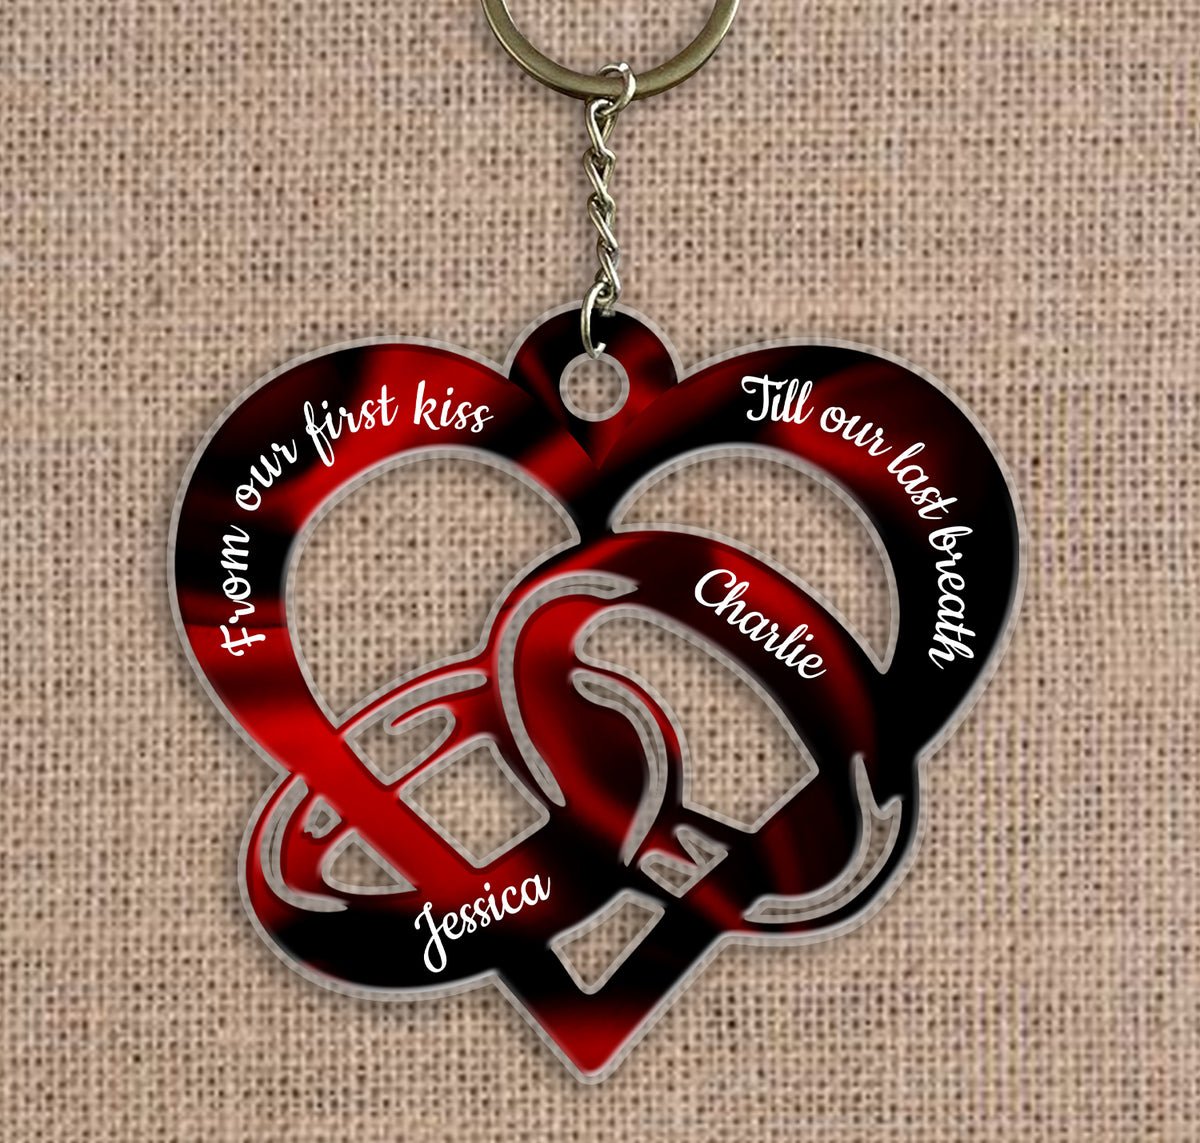 Heart Ring From Our First Kiss - Personalized Acrylic Keychain - Couple Gift